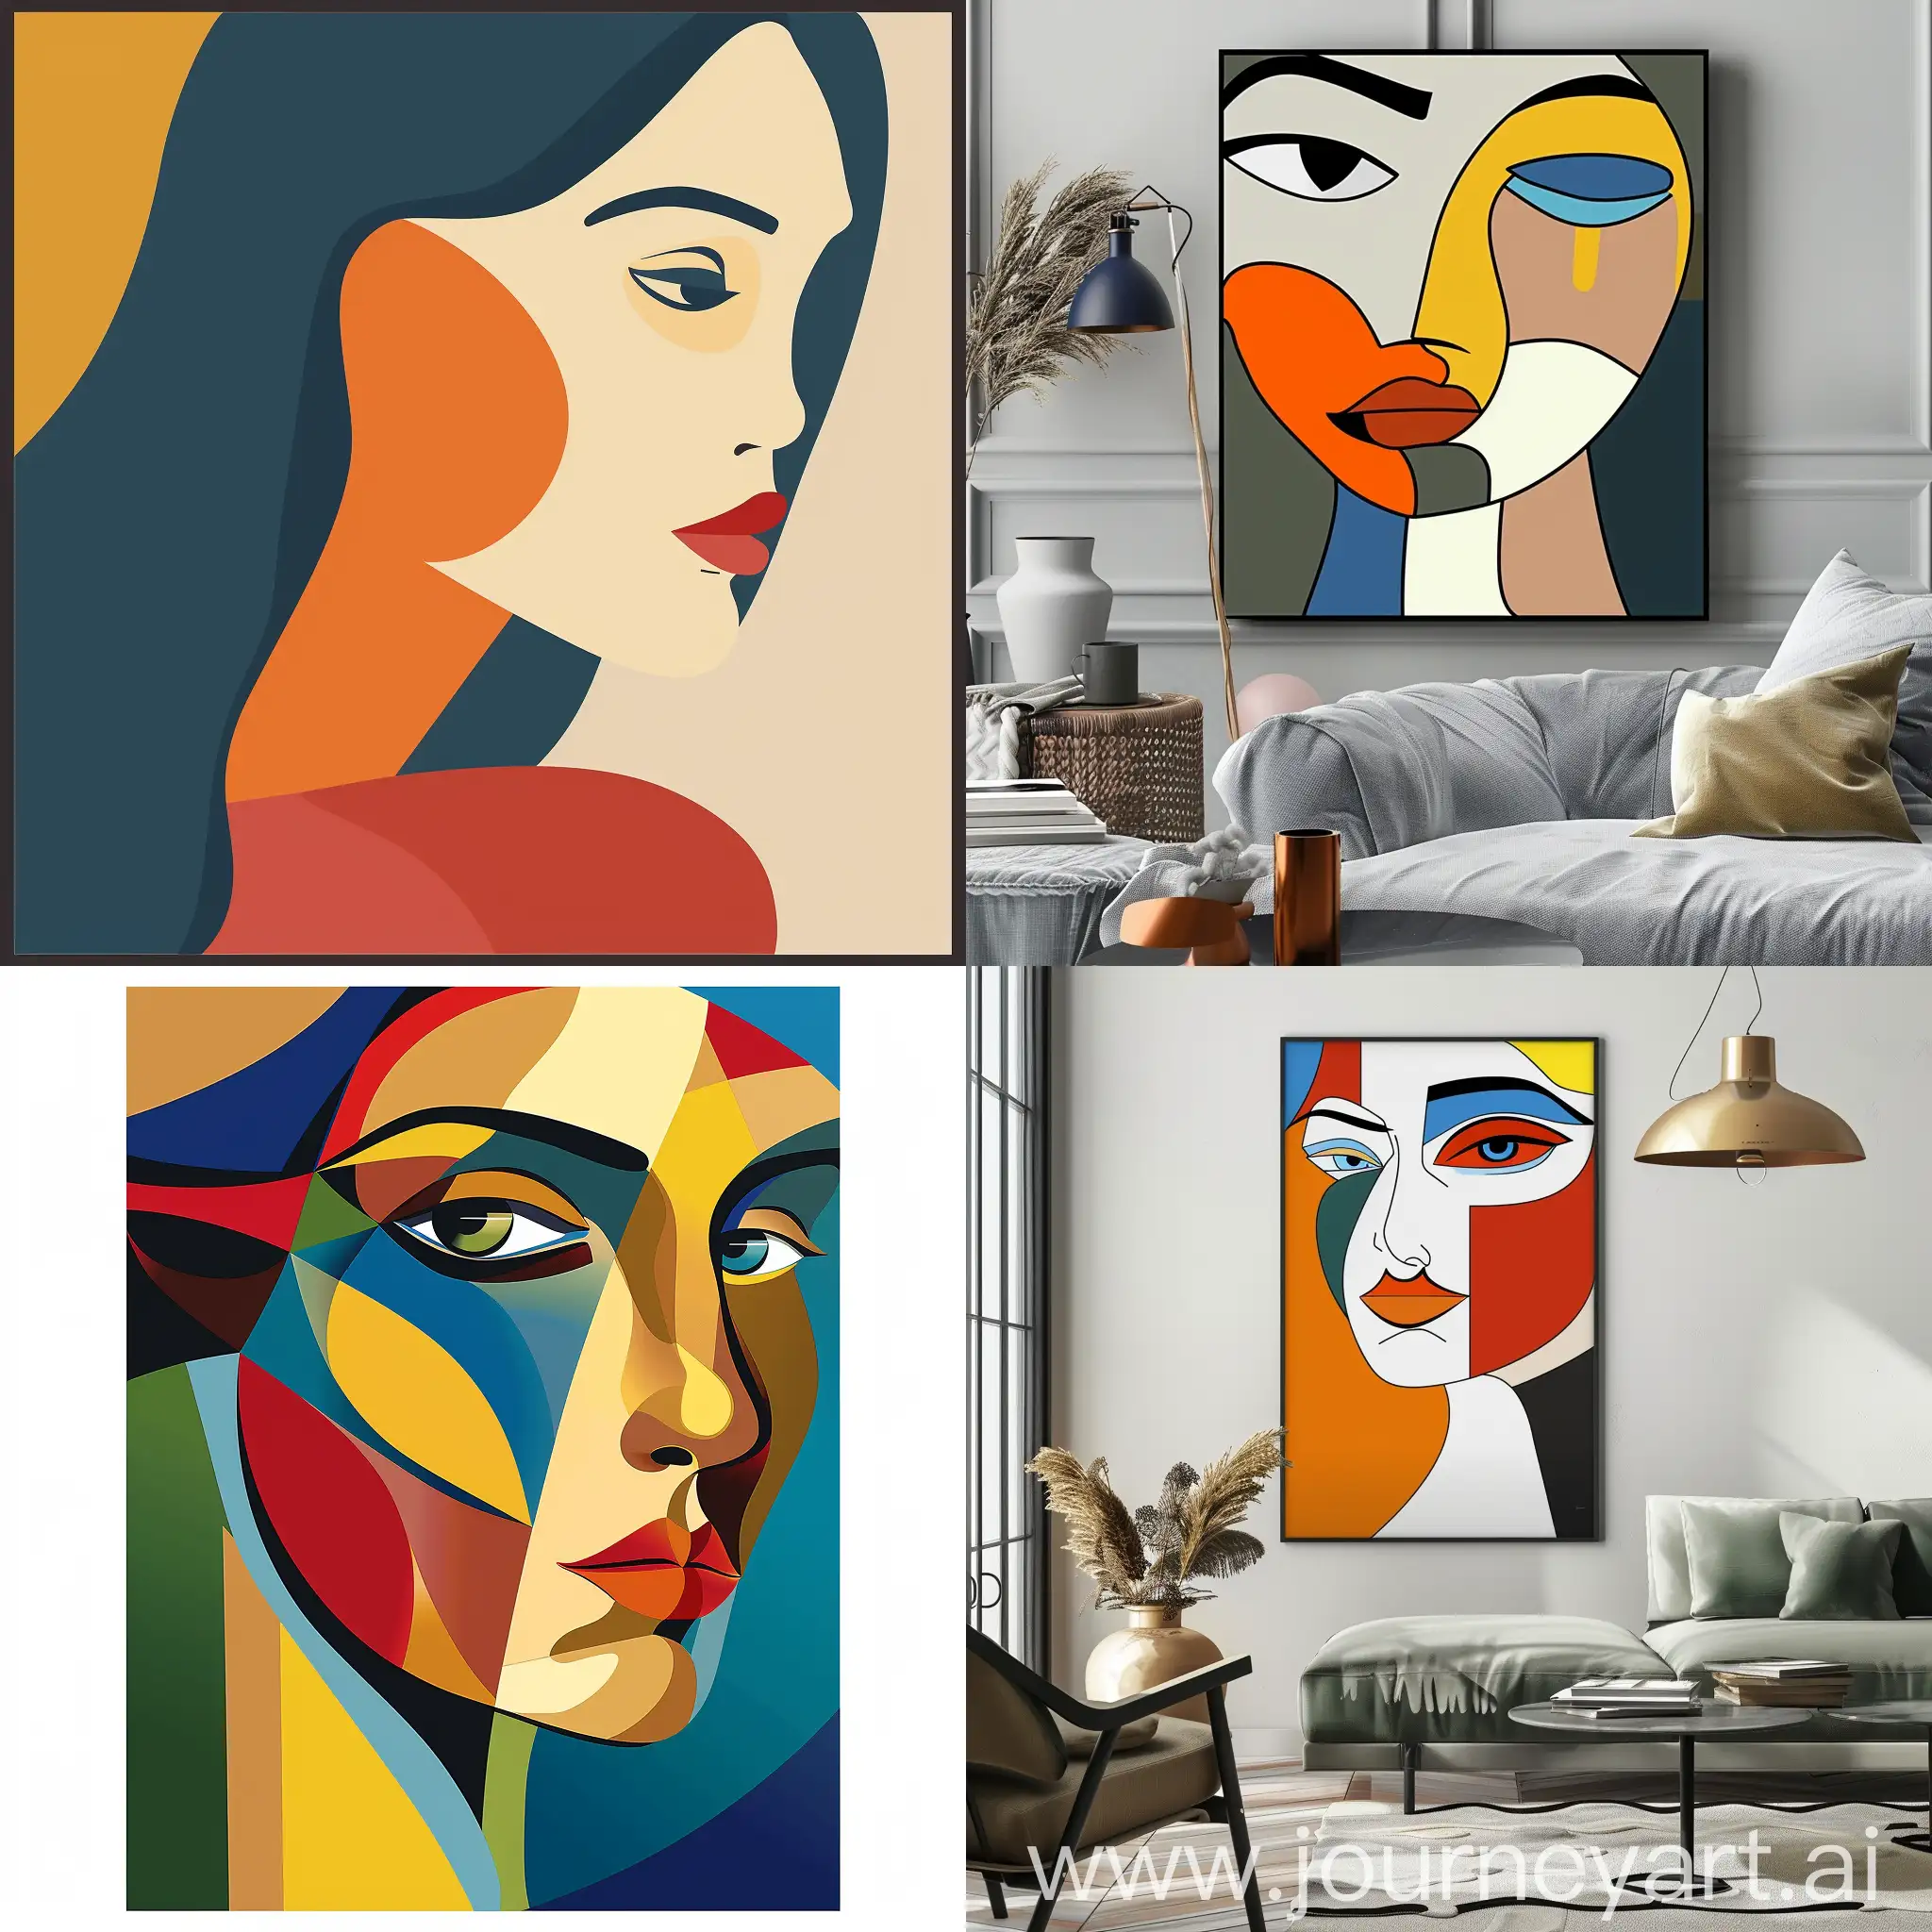 Abstract cartoon Female portrait poster on the wall by Alexander Archipenko and Keith Negley.
